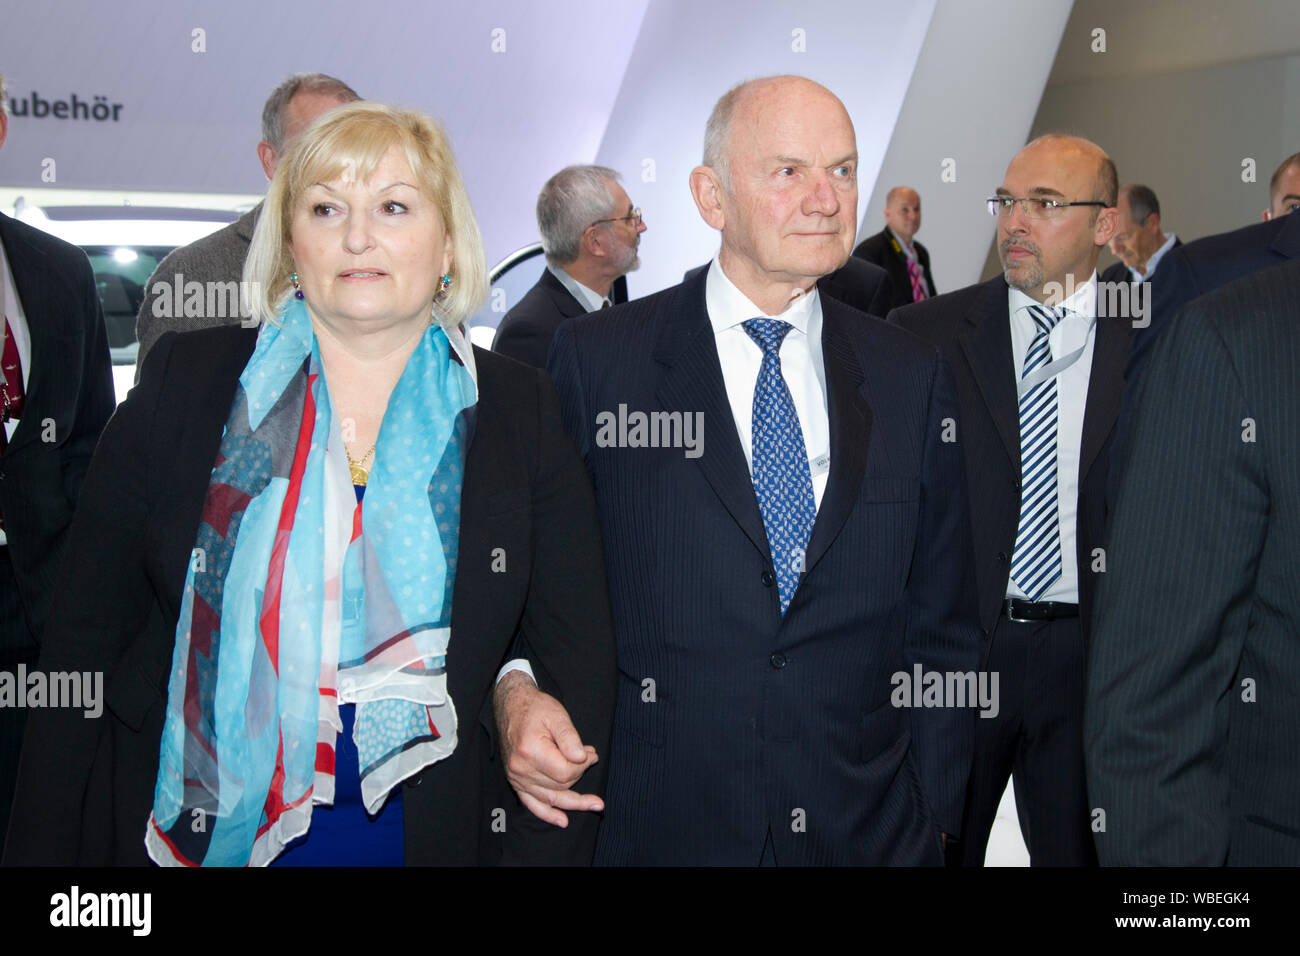 Hamburg, Deutschland. 27th Aug, 2019. Ferdinand PIECH died at the age of 82 years. Archive photo: The chairman of the supervisory board Ferdinand PIECH and wife Ursula on tour of the exhibition hall, Annual General Meeting of Volkswagen AG Aktiengesellschaft in Hamburg on 19.04.2012 å | usage worldwide Credit: dpa/Alamy Live News Stock Photo